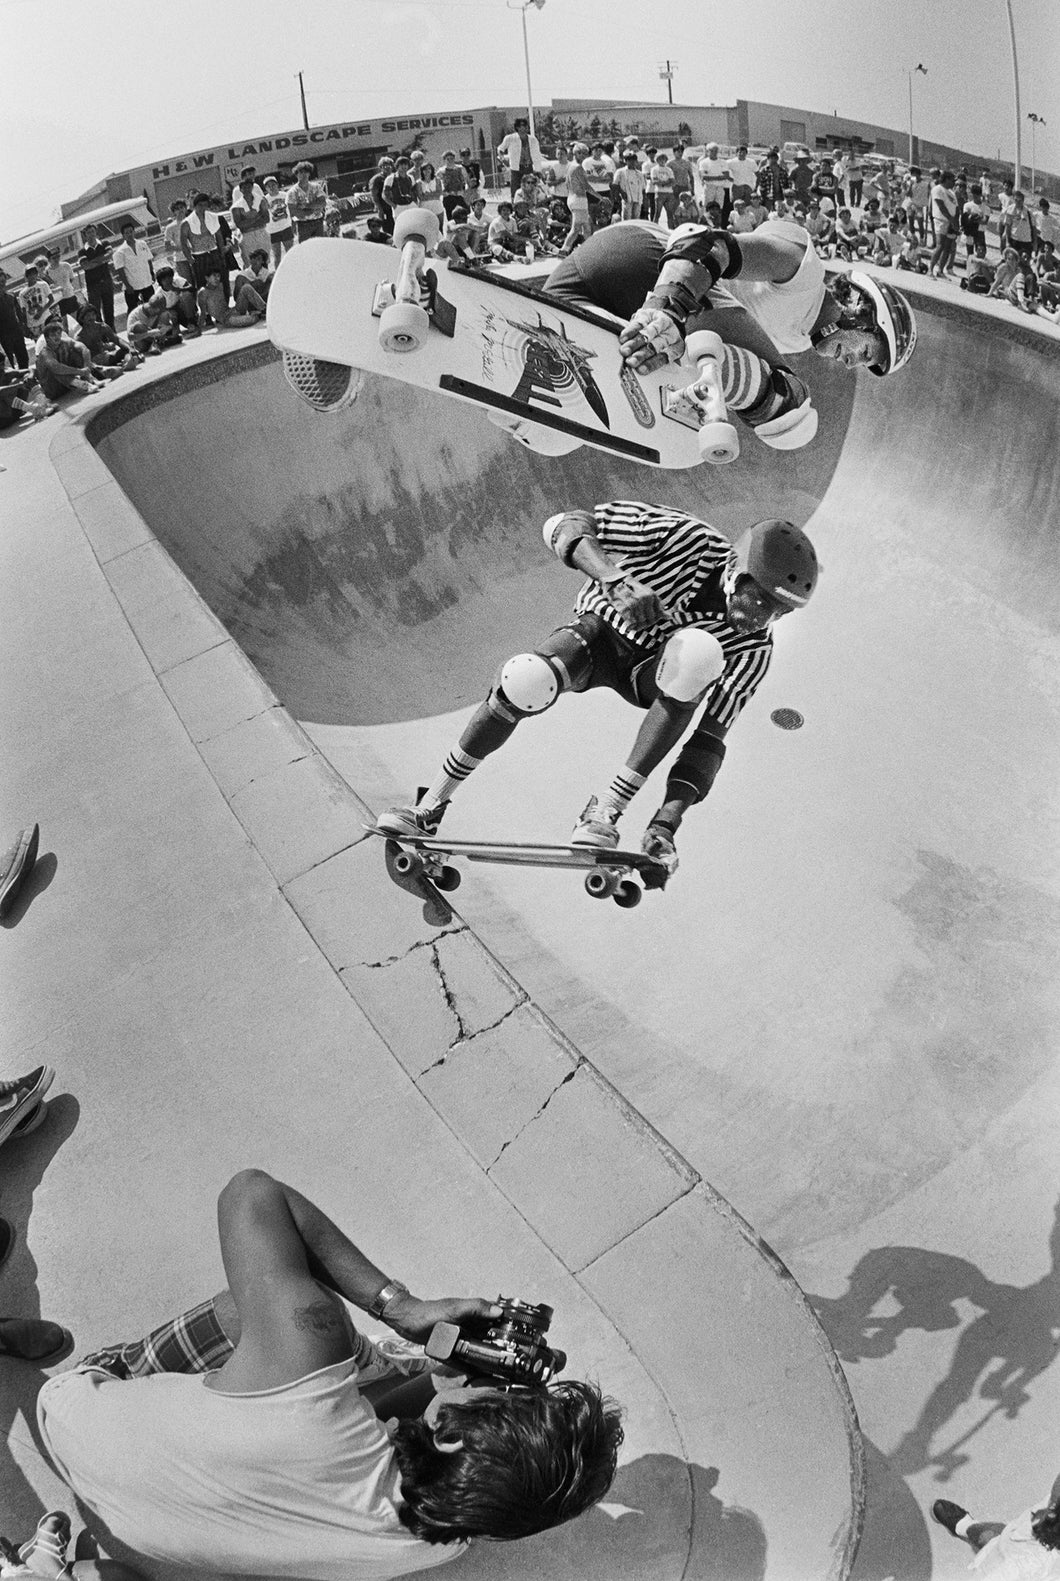 Steve Steadham and Mike McGill Doubles Upland 1985 Skateboarding Photo